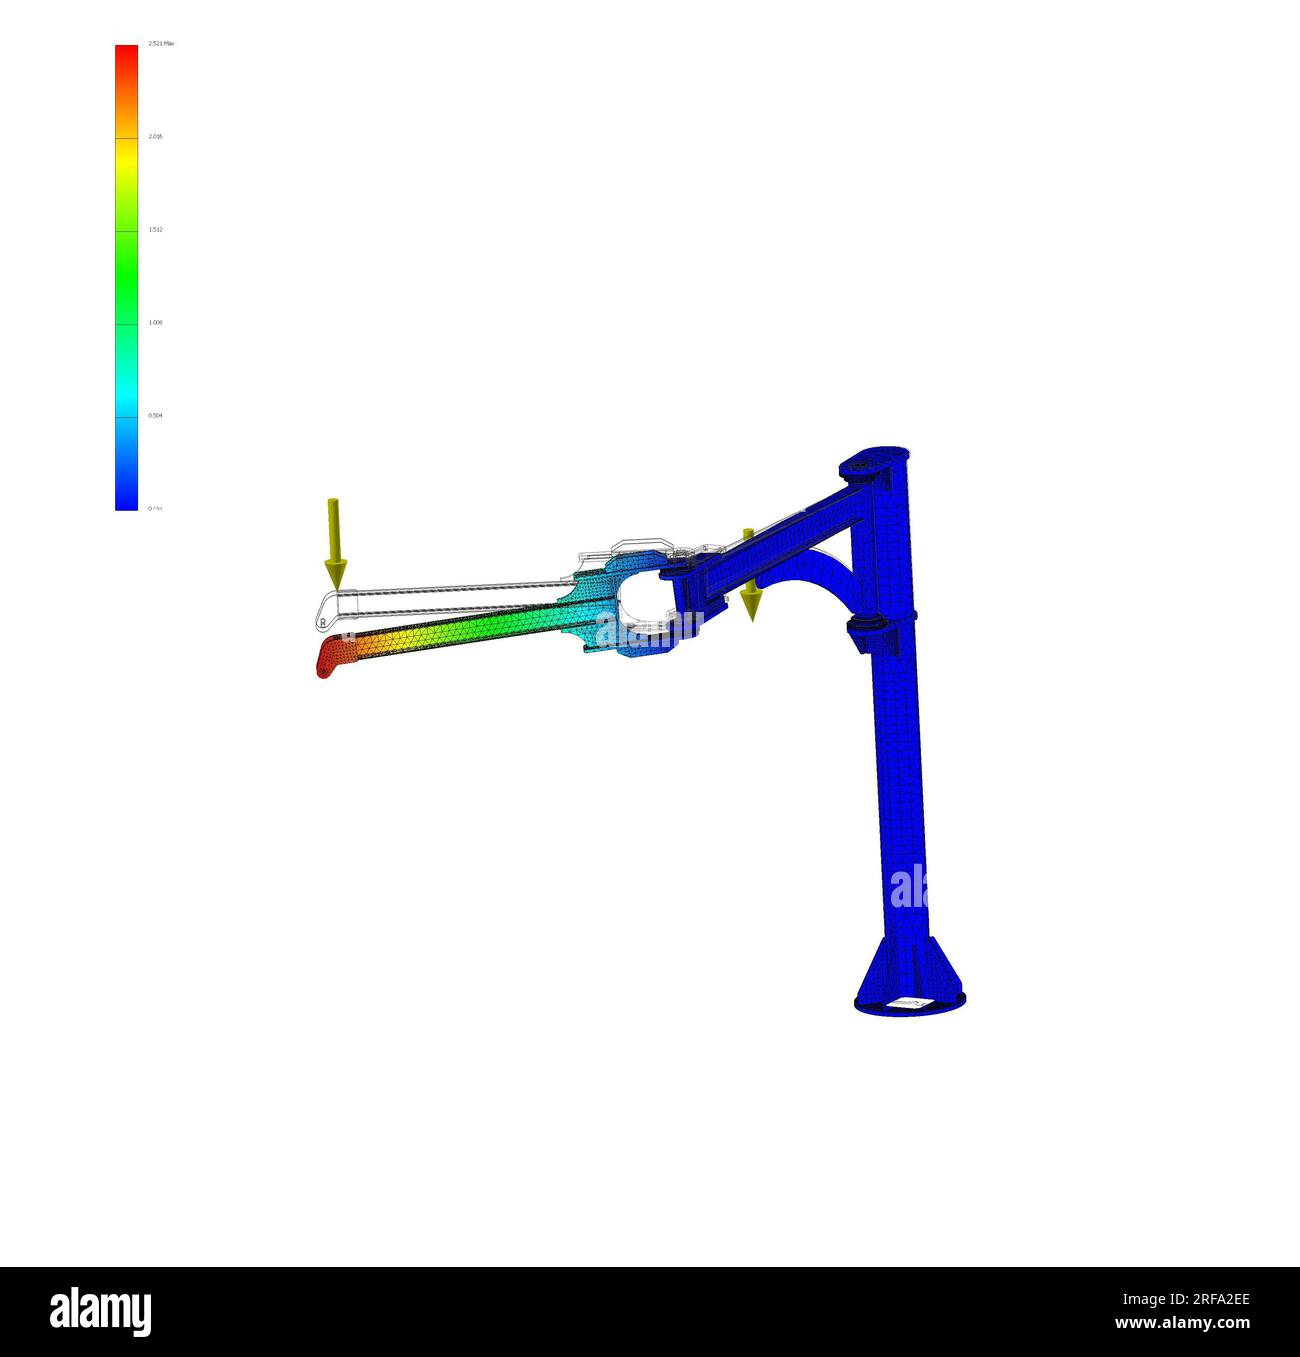 FEM analysis, finite element analysis, of axle and arm pull swing, stress test Stock Photo